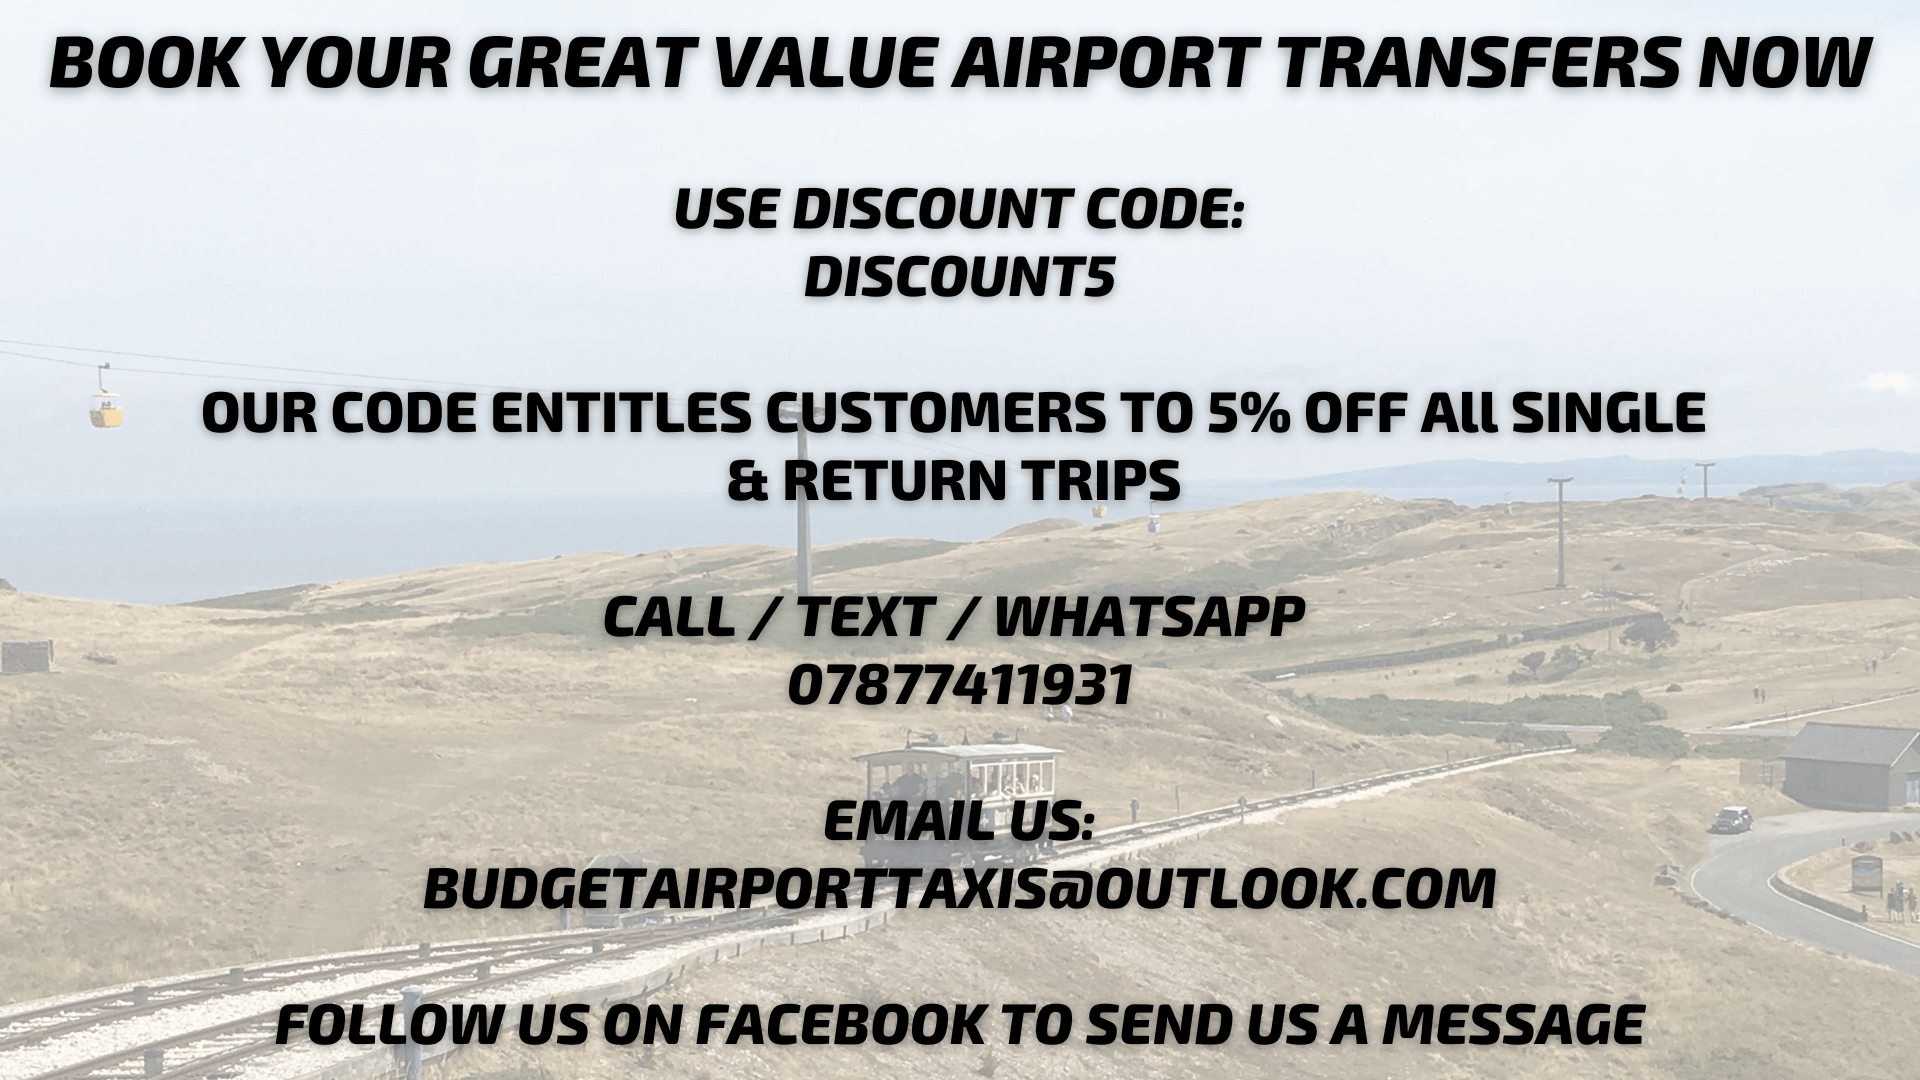 glasgow airport taxi transfer 5% discount